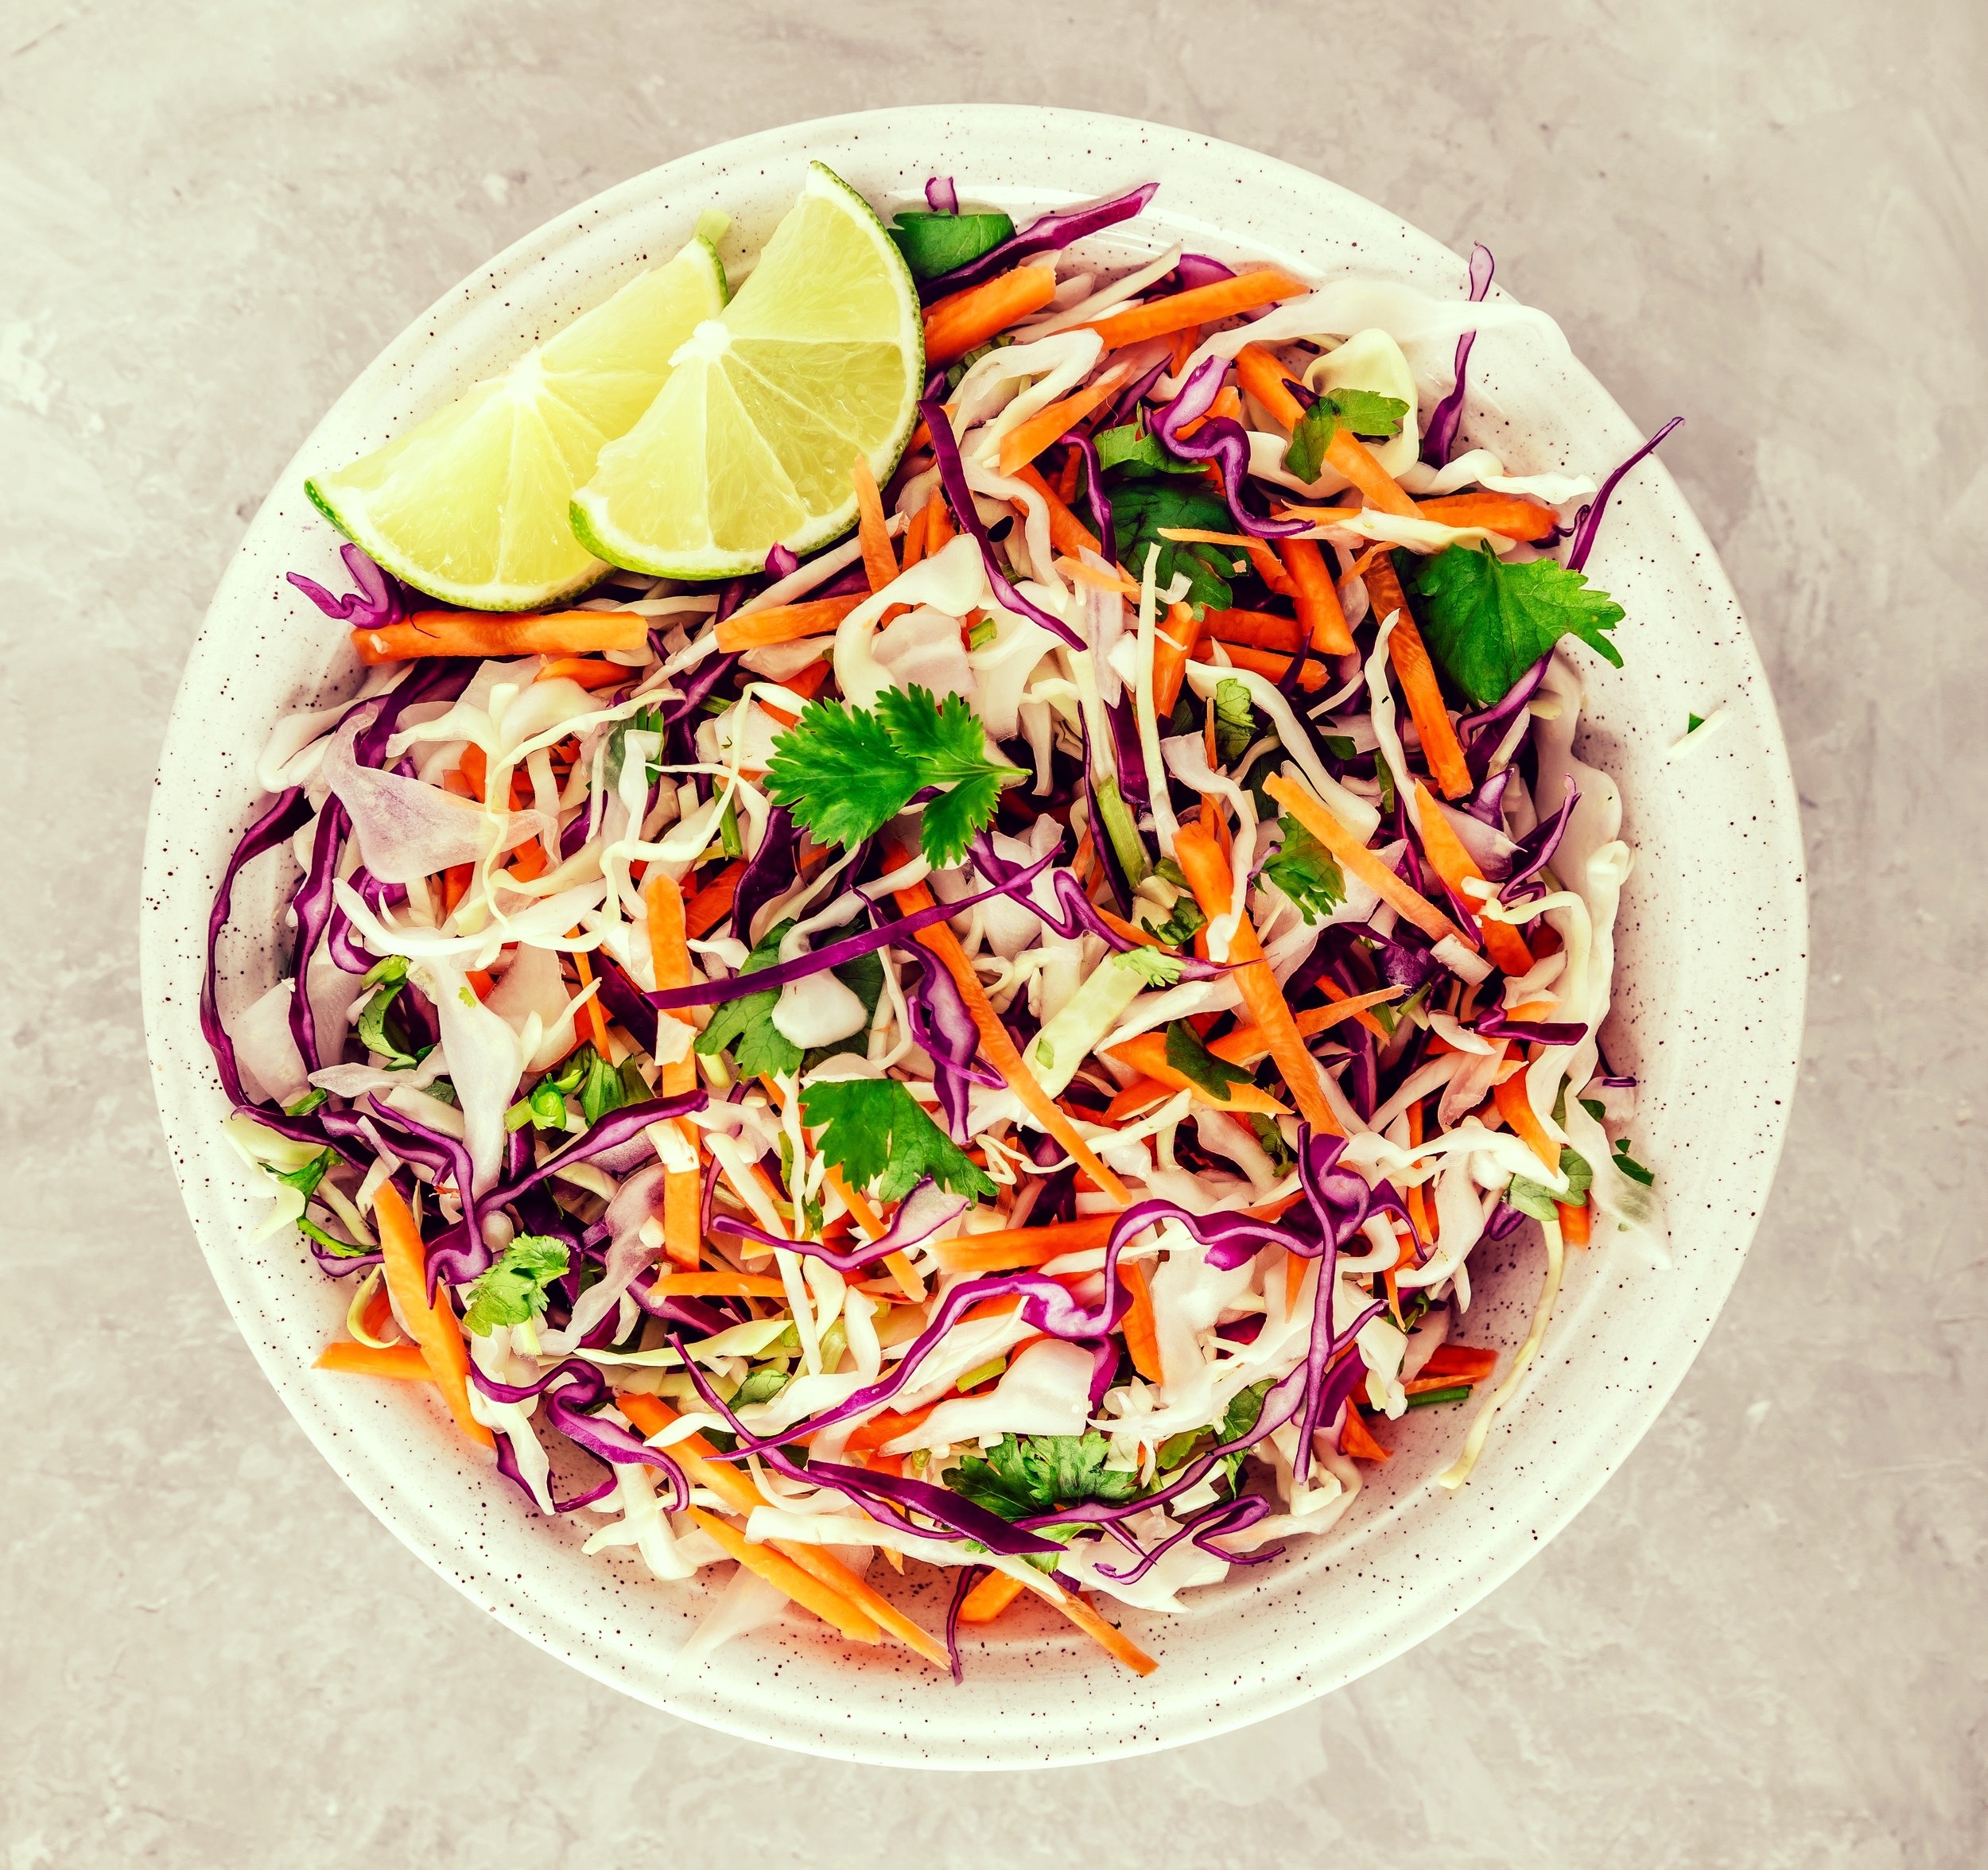 cilantro-lime-coleslaw-salad-with-red-and-white-6THBFSC.jpg